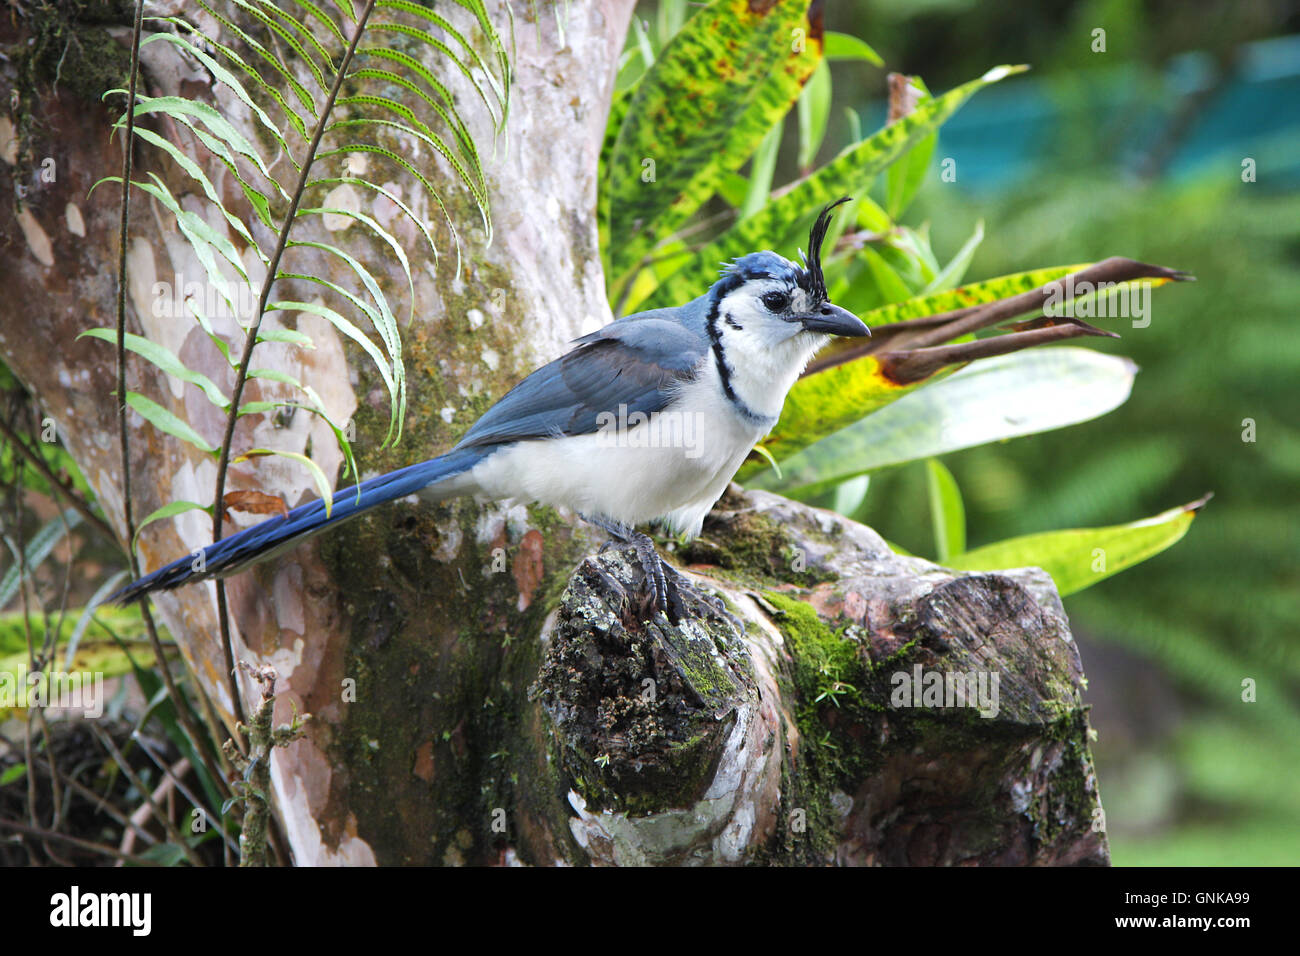 A White-throated Magpie Jay [Calocitta formosa] sitting on a tree. Costa Rica. Stock Photo